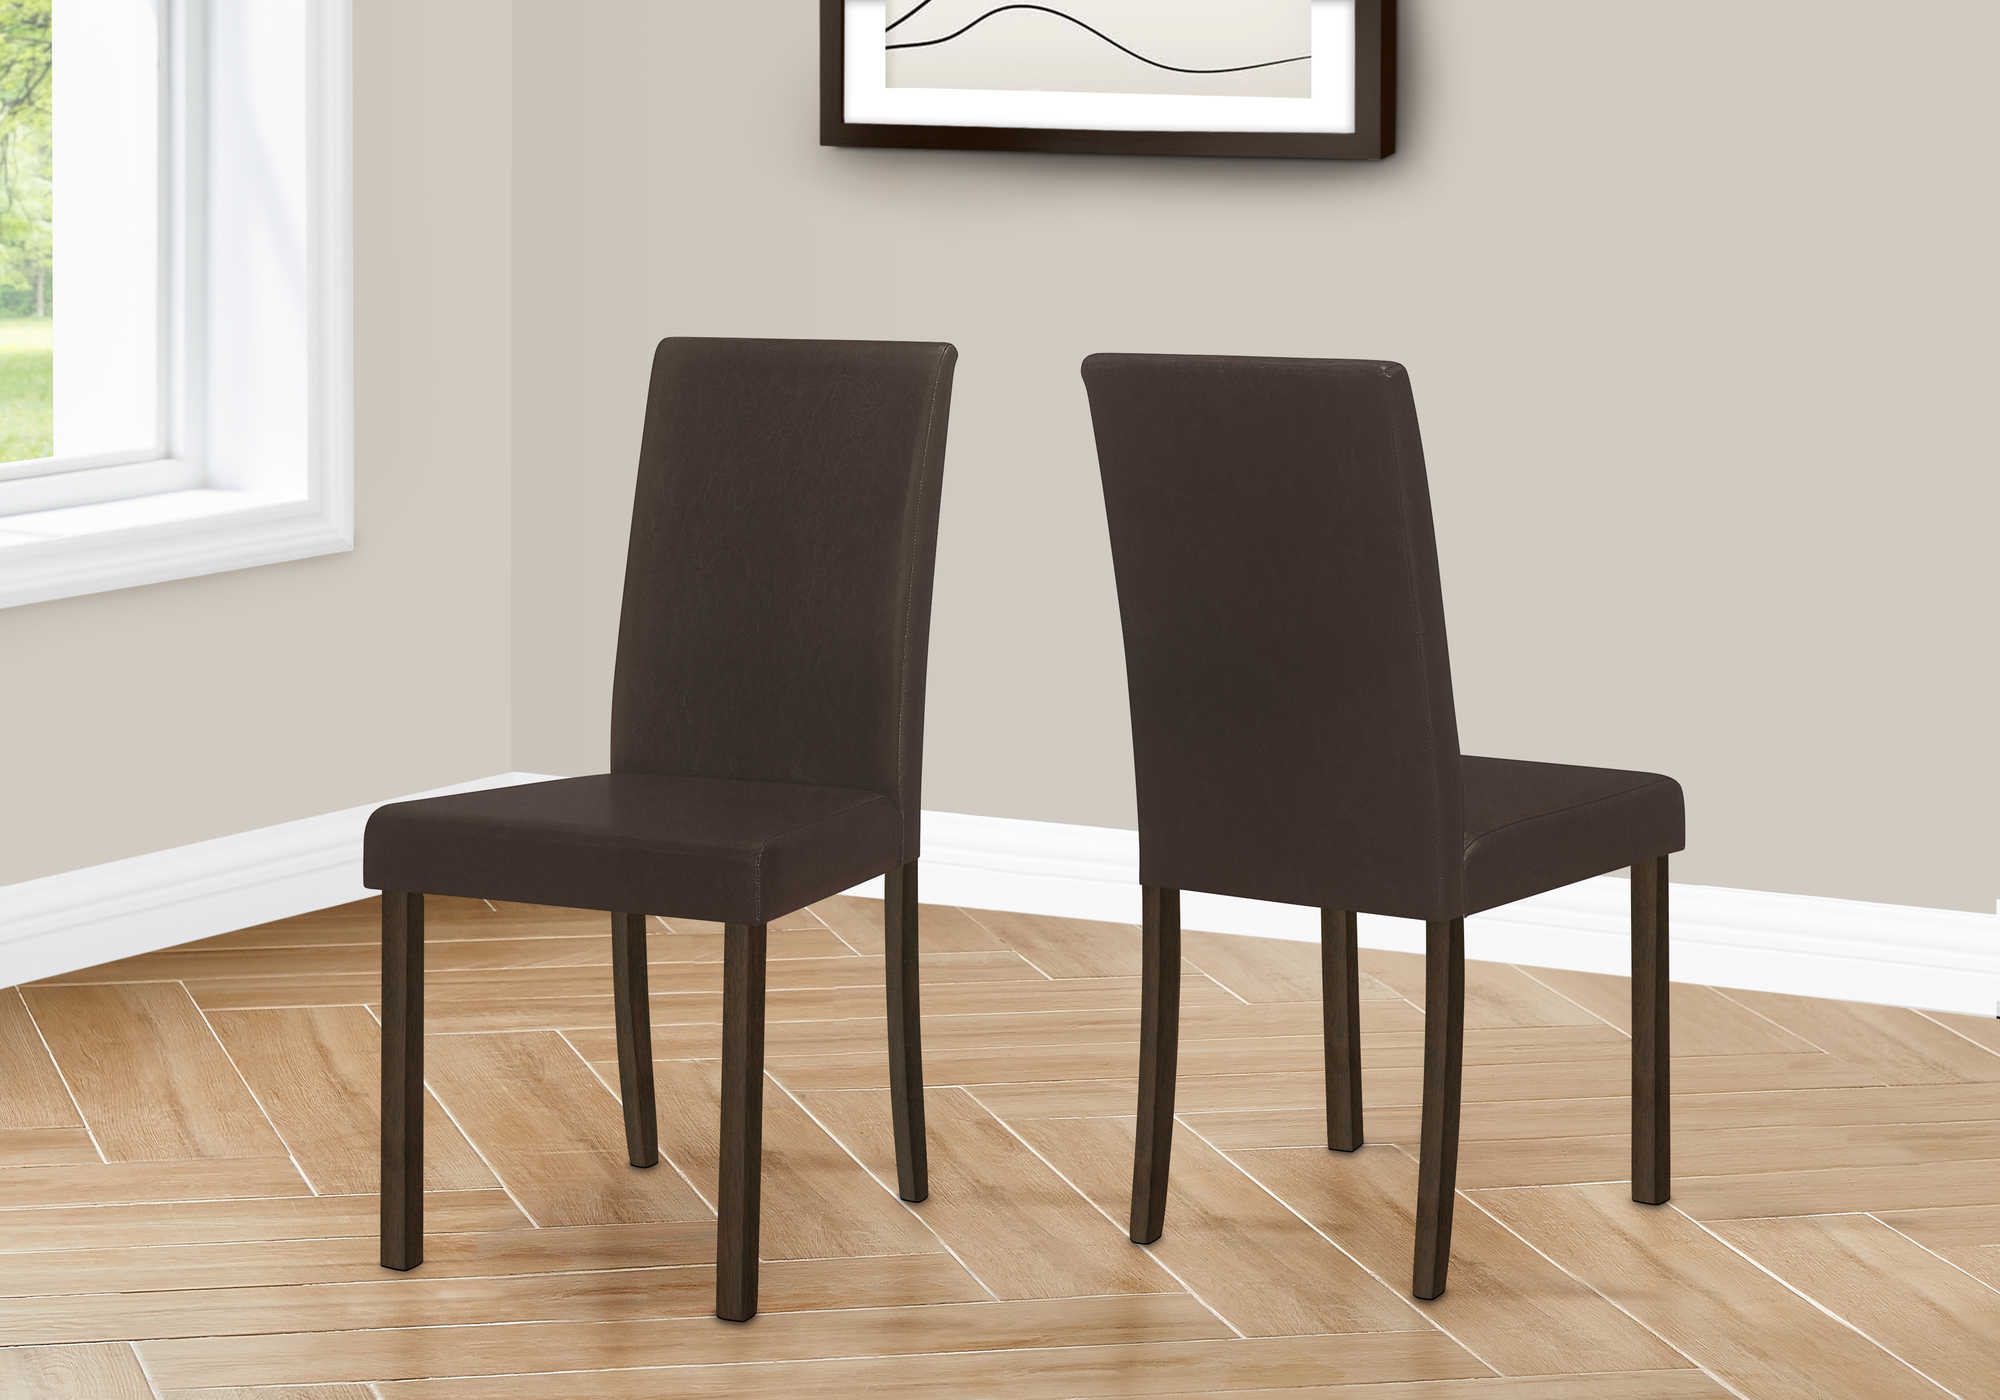 DINING CHAIR - 2PCS / 36"H DARK BROWN LEATHER-LOOK